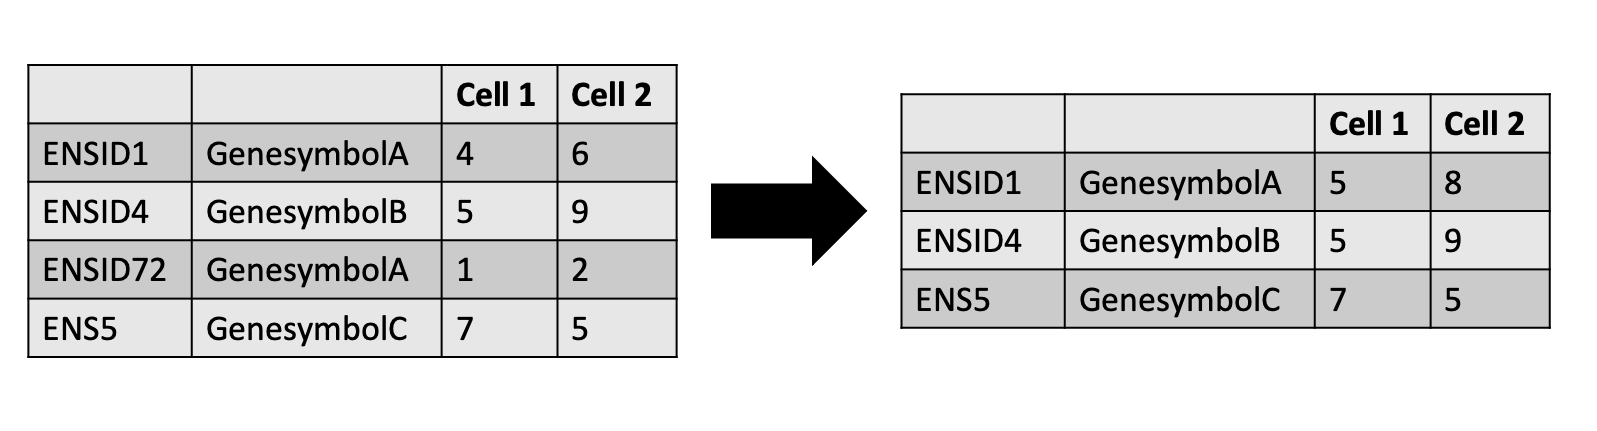 First table shows 4 rows with different ENS IDs and a second column with geney symbols and some overlap. Arrow pointing to second table shows 3 rows having collapsed the overlap.